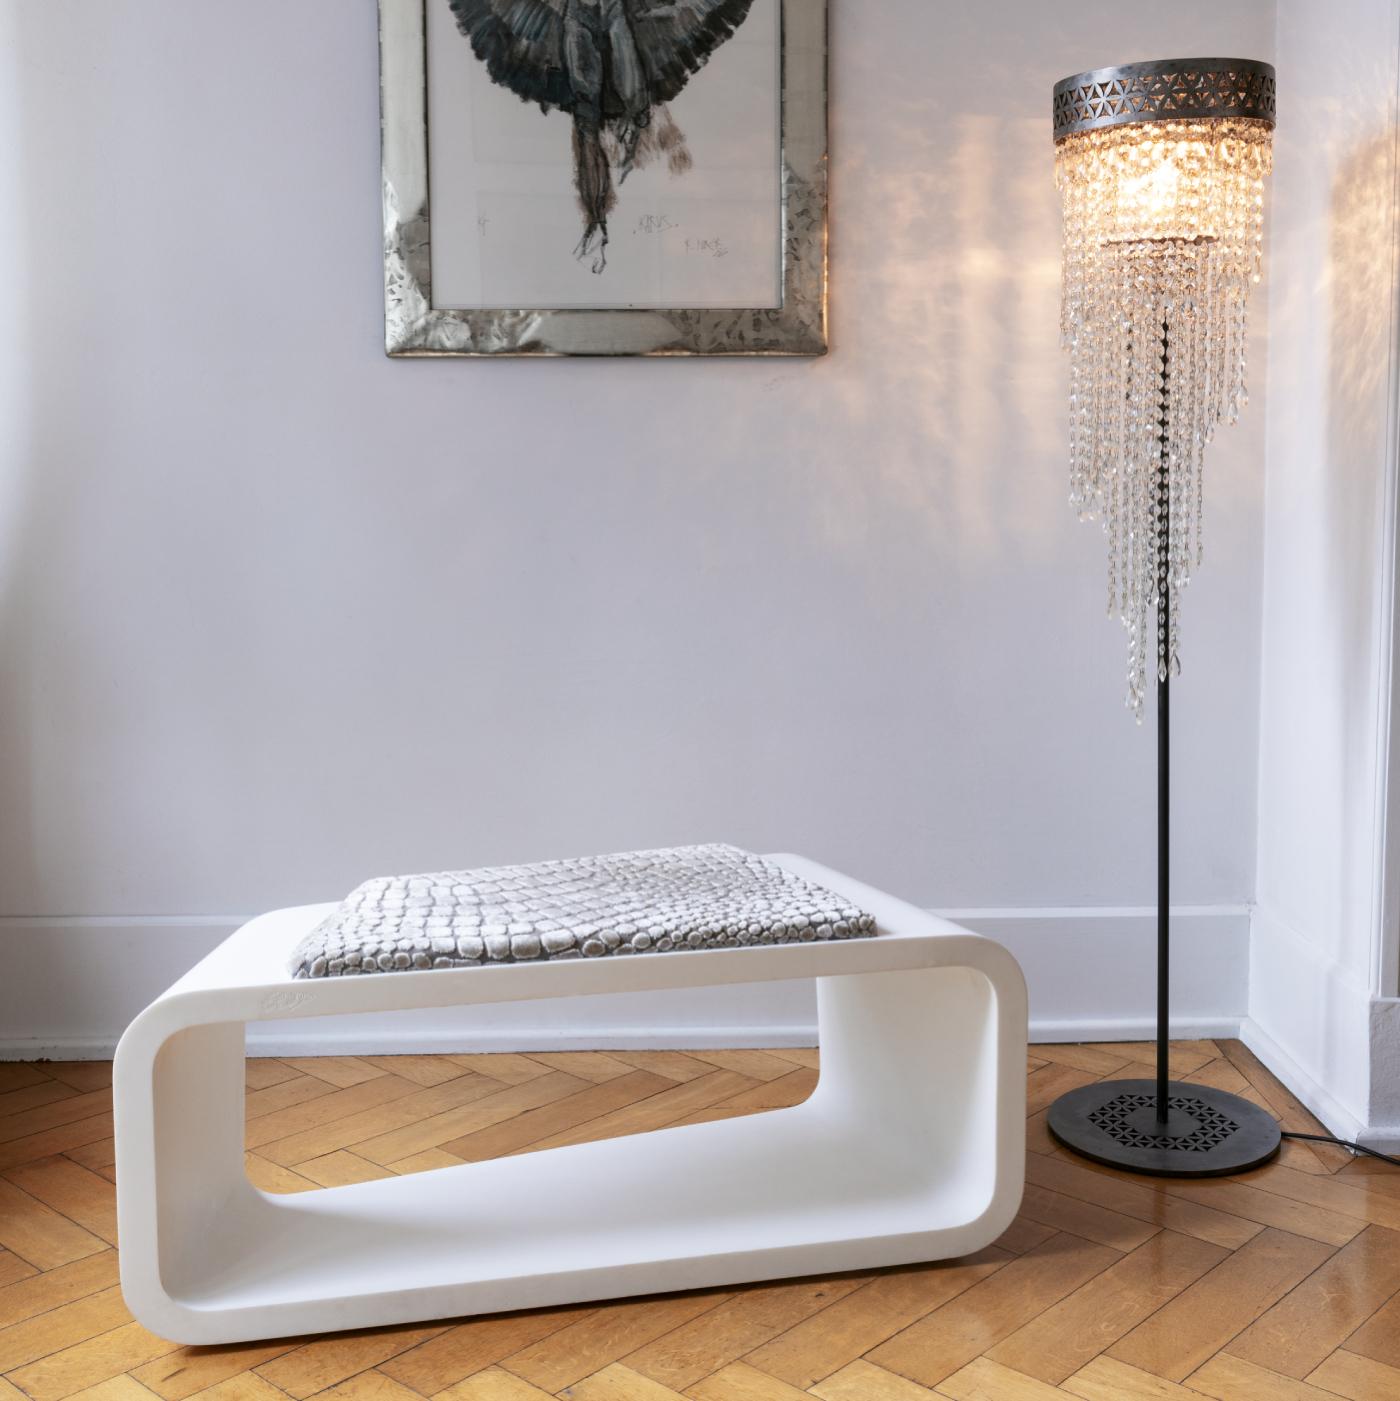 Marked by a skewed rectangular shape that results from skilled hand-craftsmanship and technological precision, this bench is entirely made of a single piece of high-gloss white CorianÂ, a patented acrylic polymer composite. The top features a brown